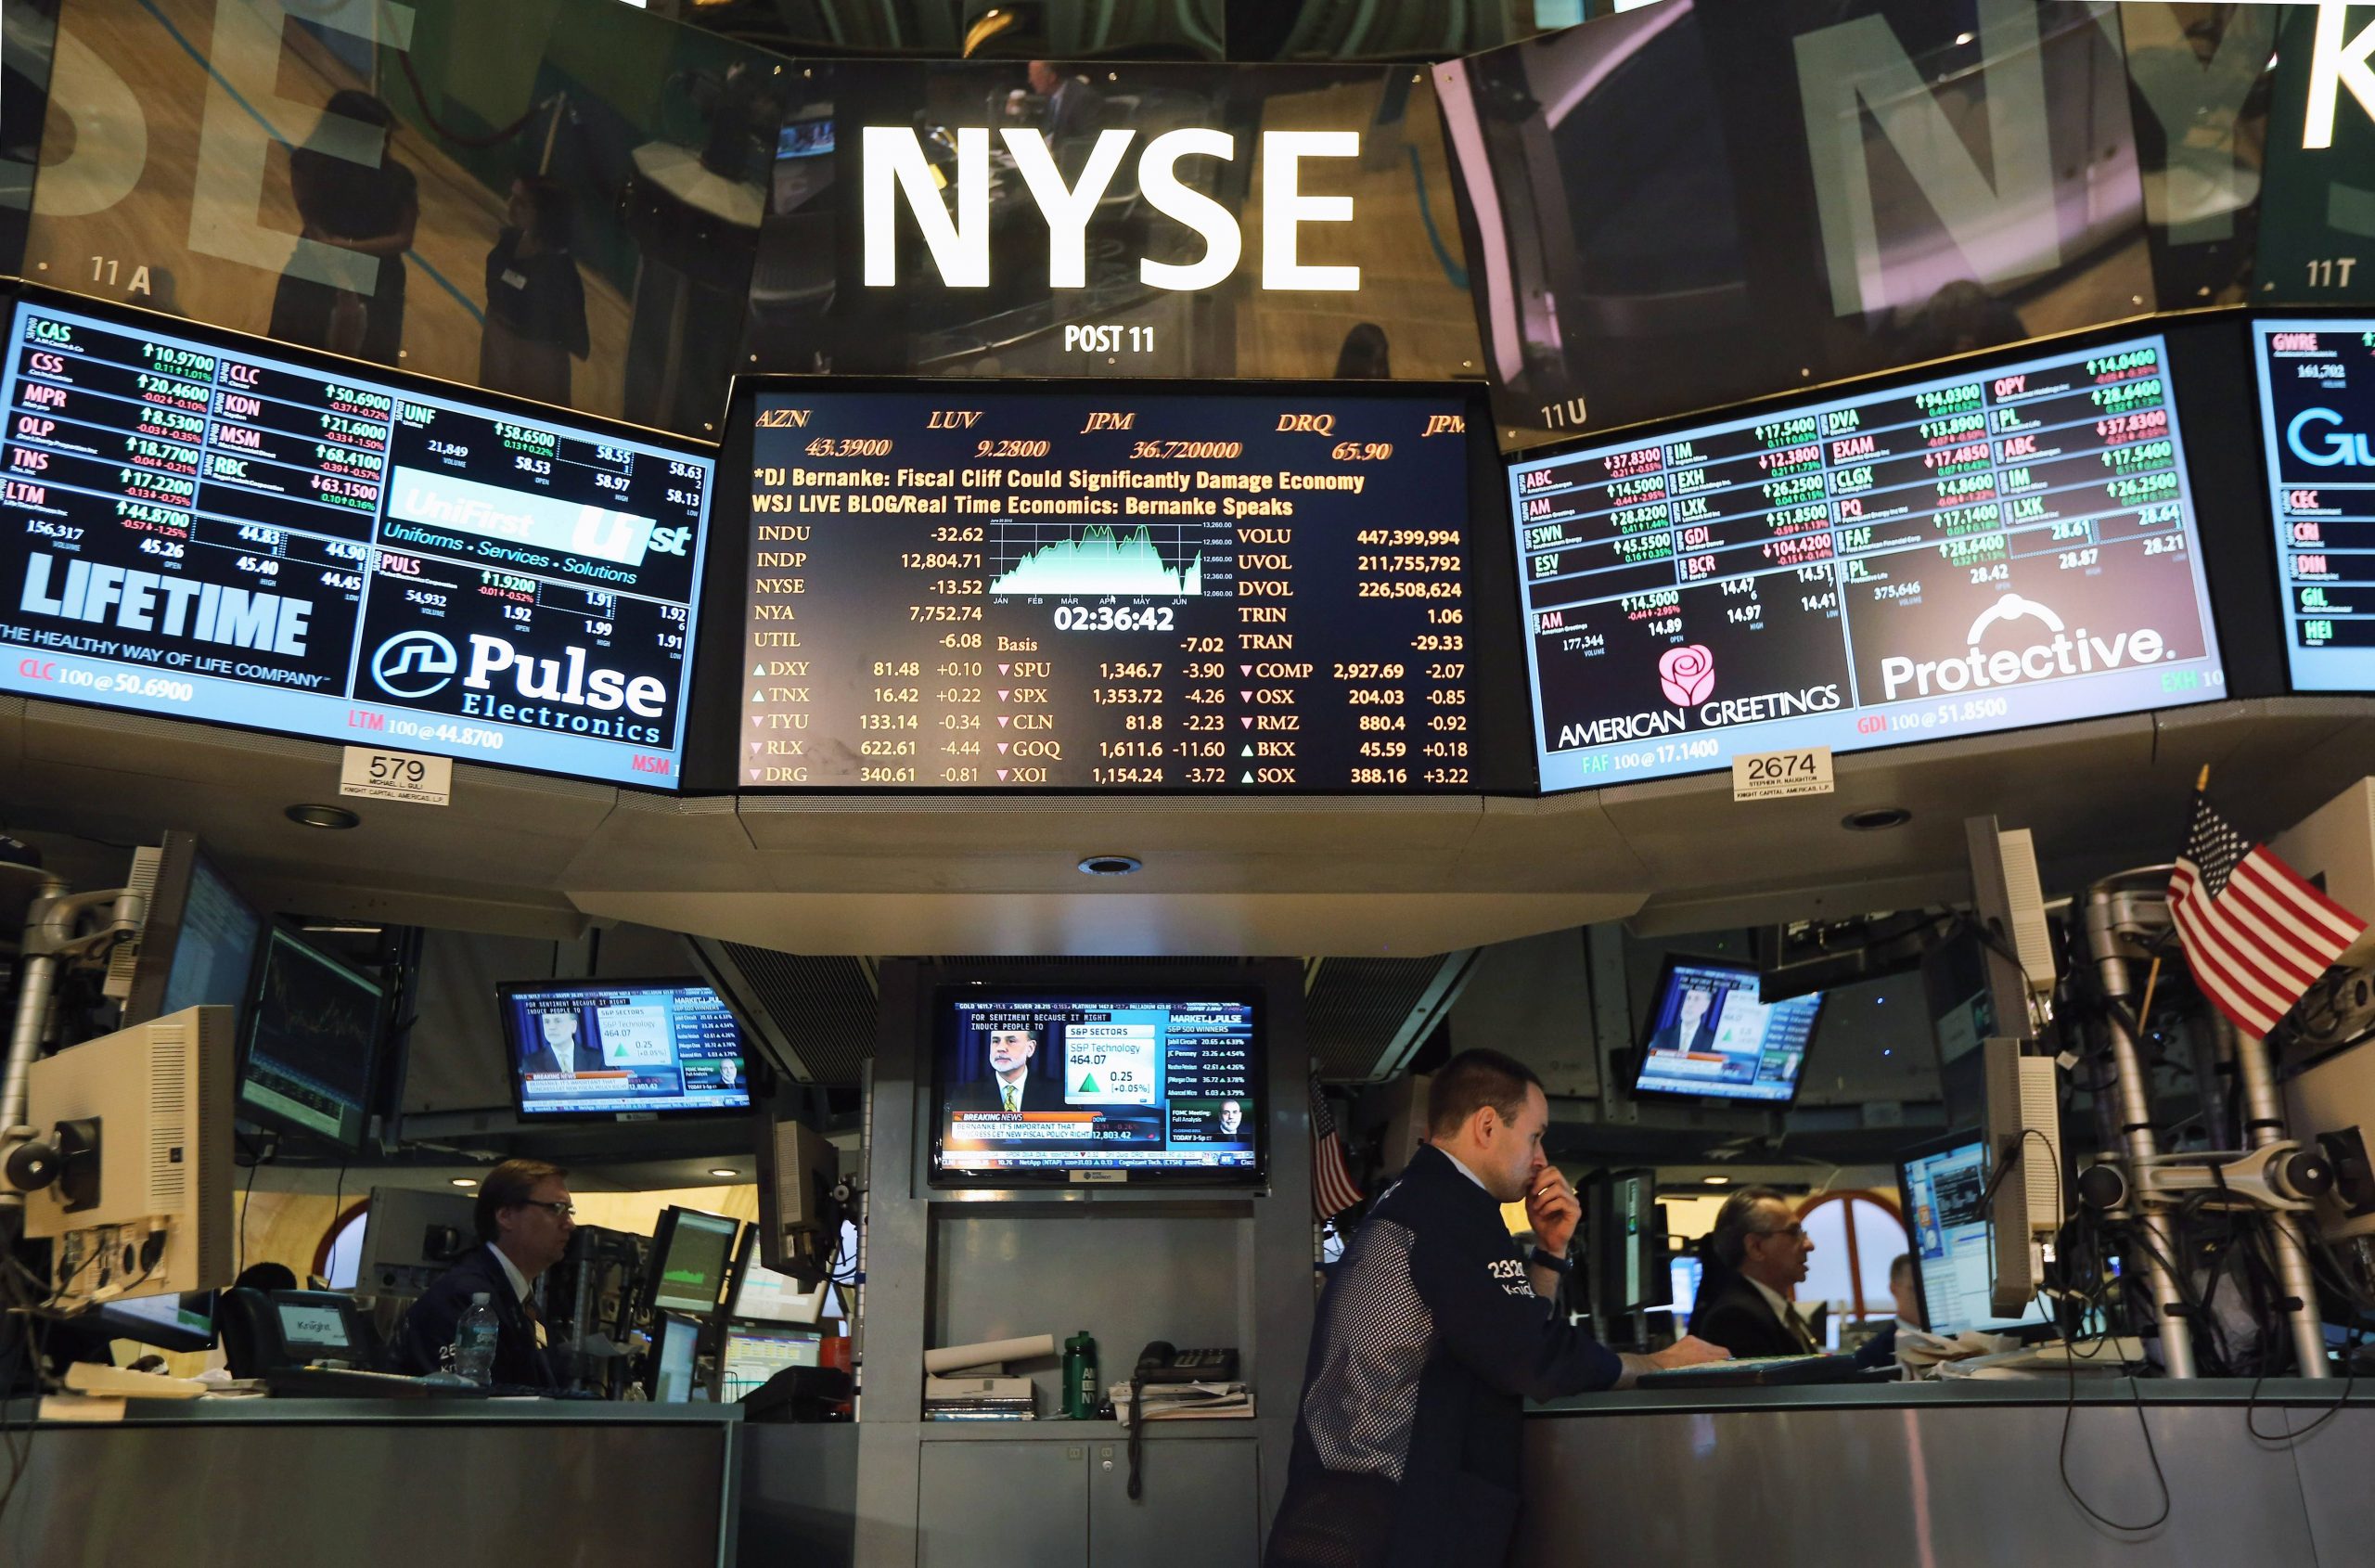 A Complete List of NYSE Holidays for 2015